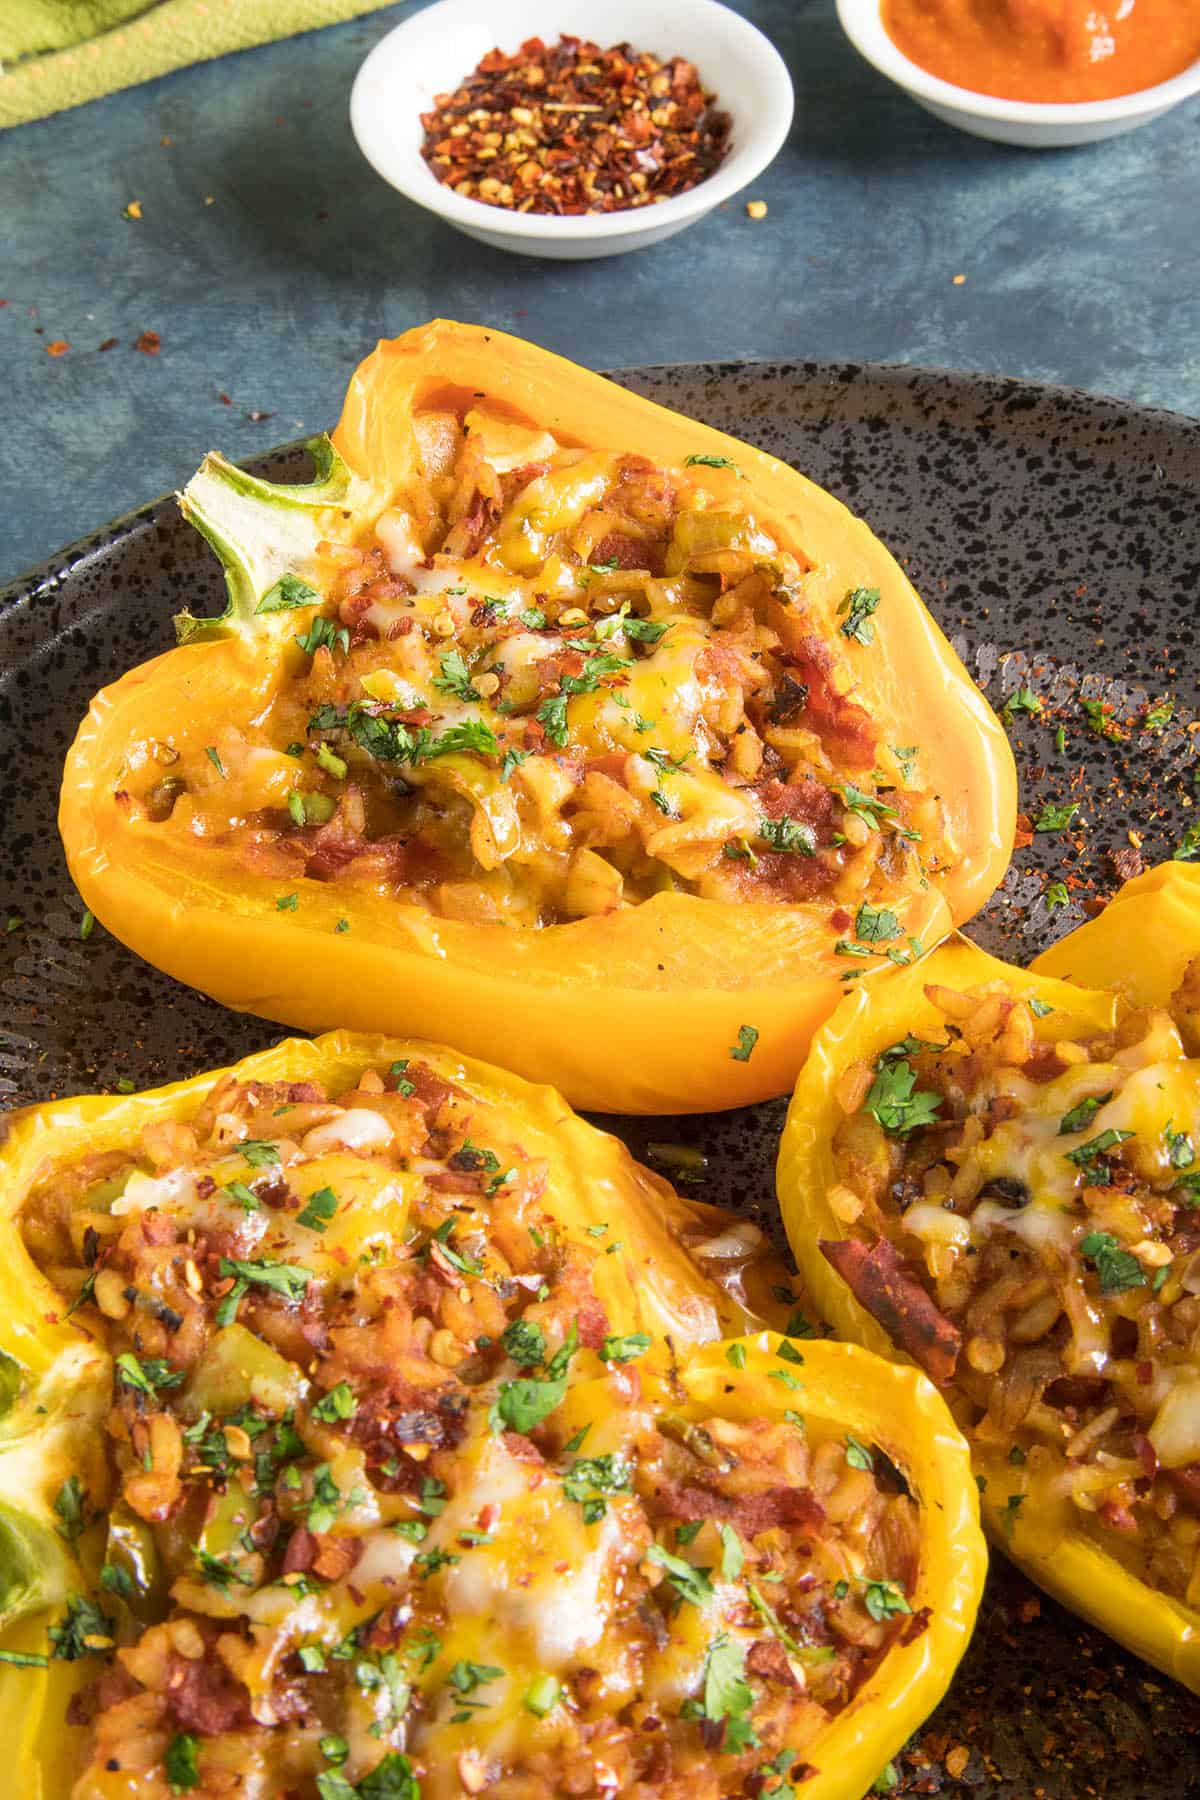 Delicious Spicy Vegetarian Stuffed Peppers, ready for you to dig in.